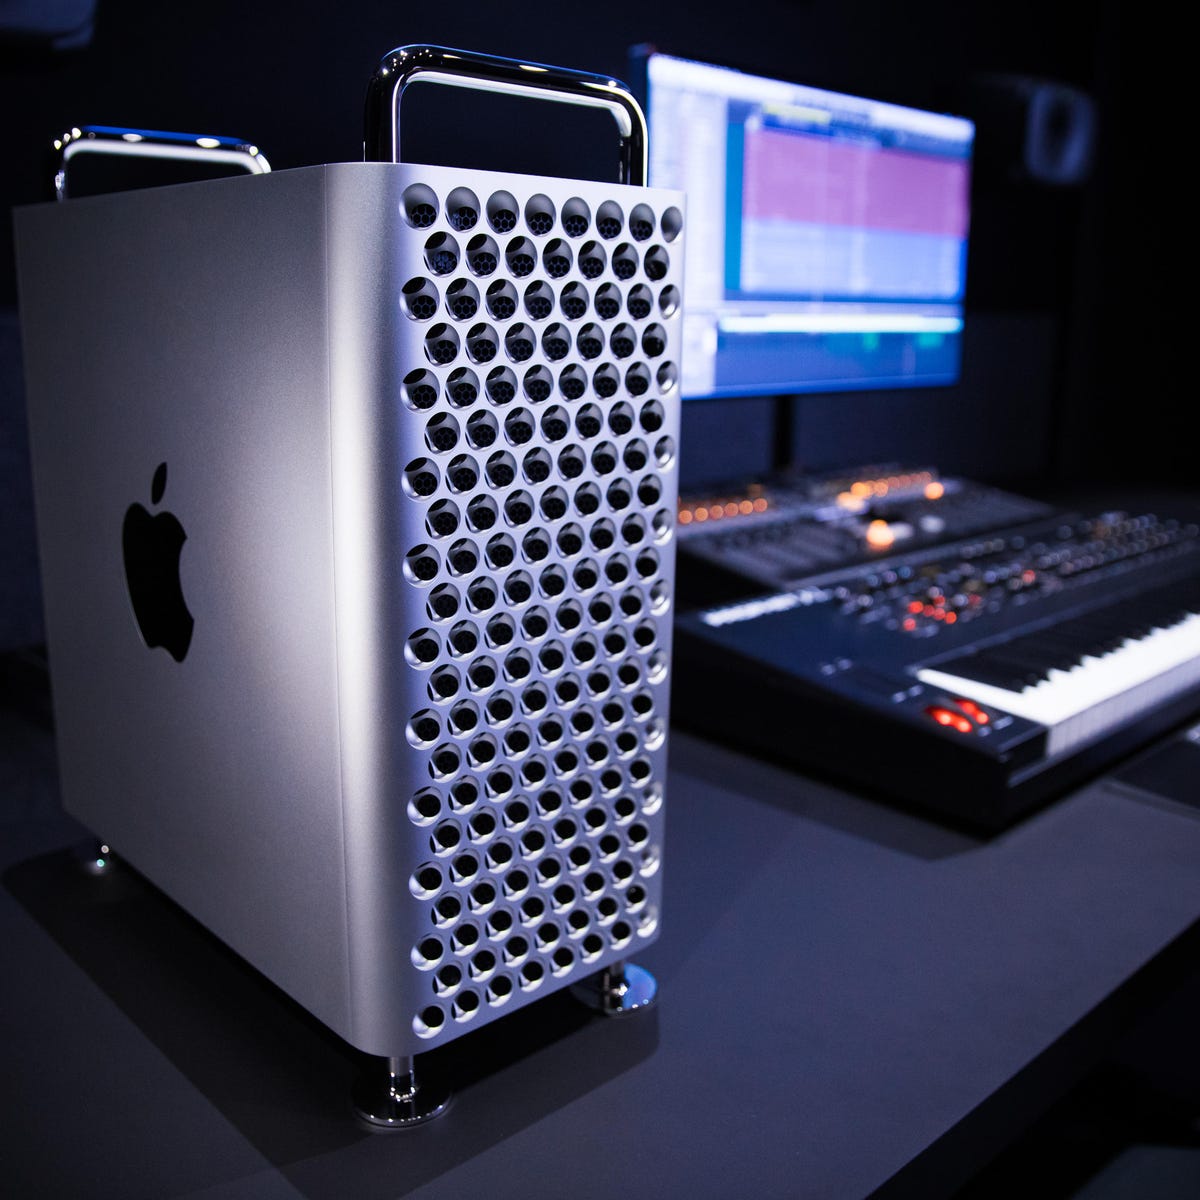 Apple takes the new Mac Pro back to the future in a classic tower - CNET